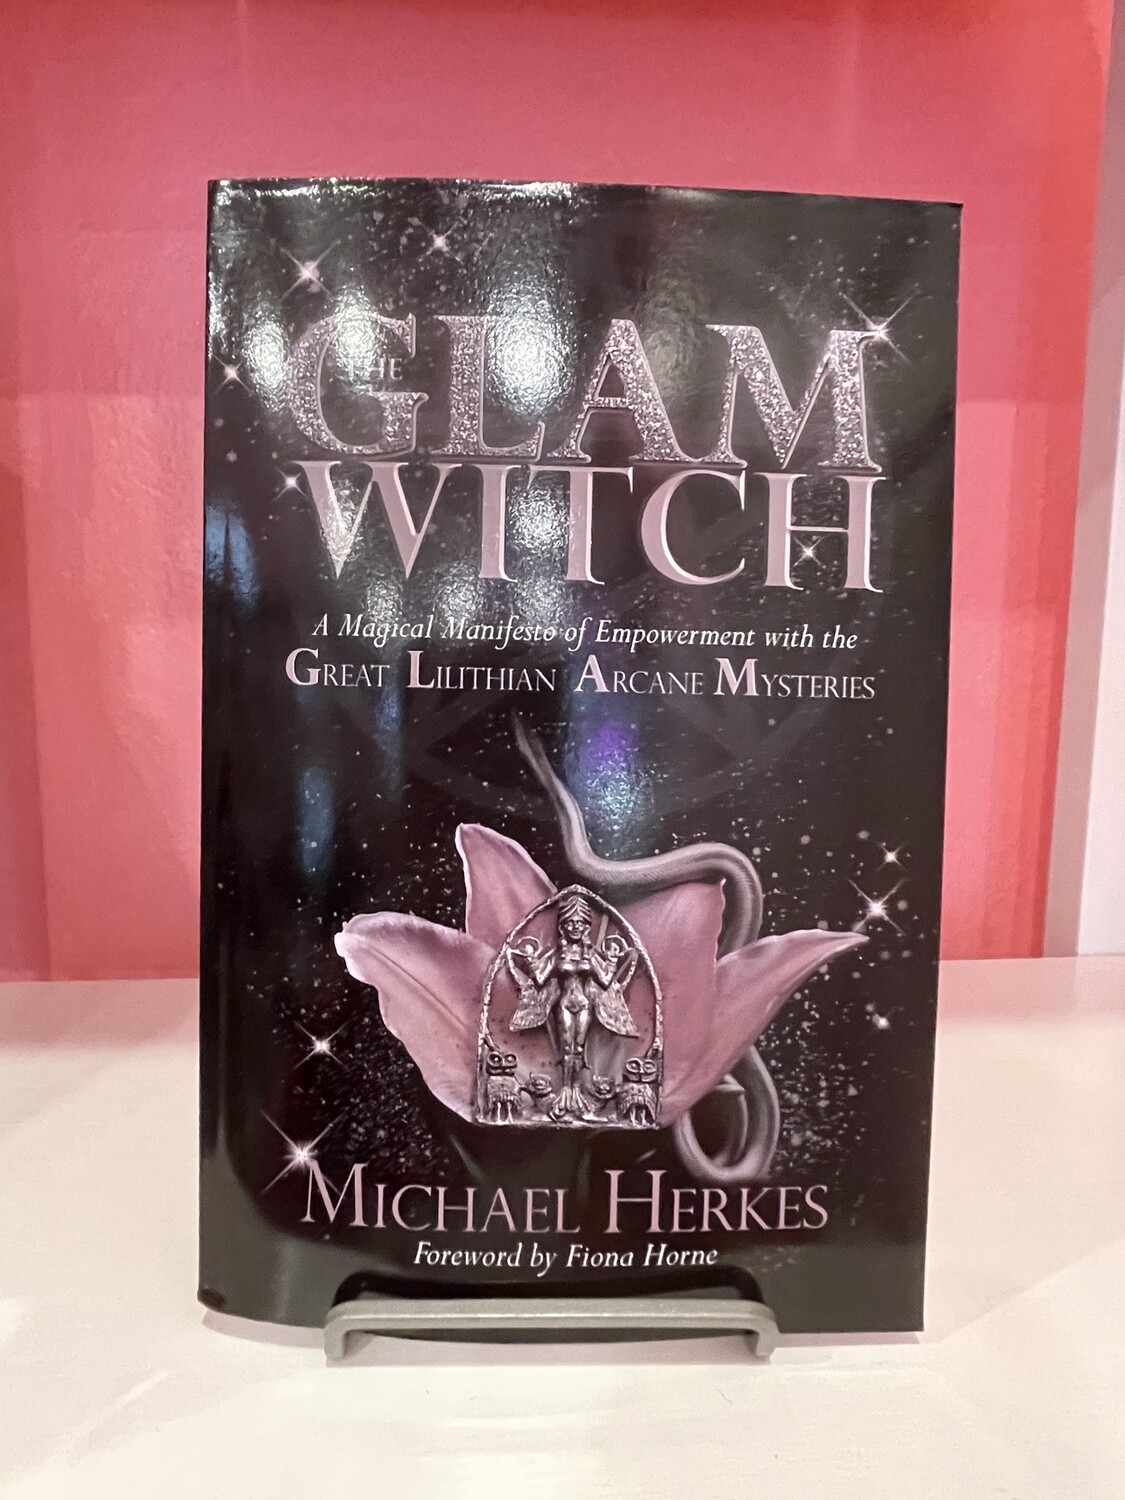 GLAM Witch: A Magical Manifesto of Empowerment with the Great Lilithian Arcane Mysteries